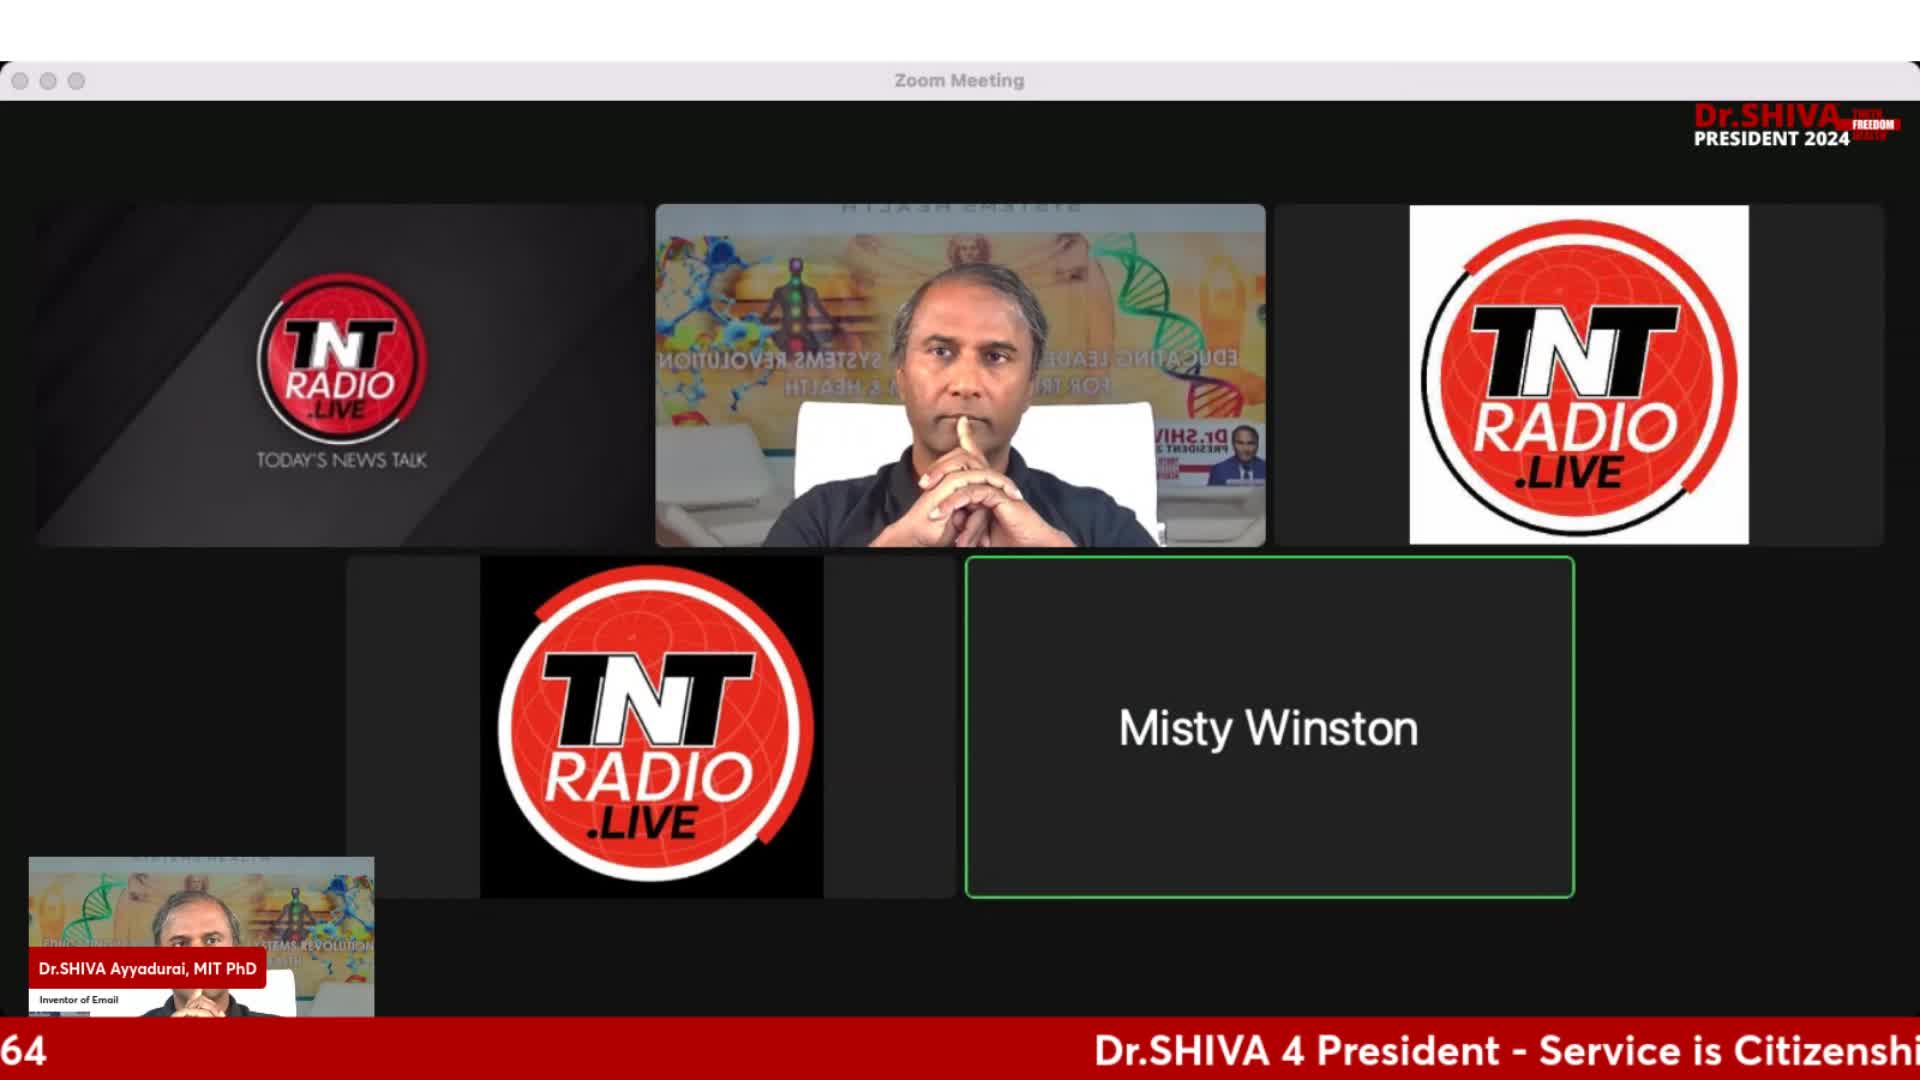 Dr.SHIVA™ LIVE - My Run For President Will Liberate Working People All Over The World - Feat. Misty Winston, TNT Radio